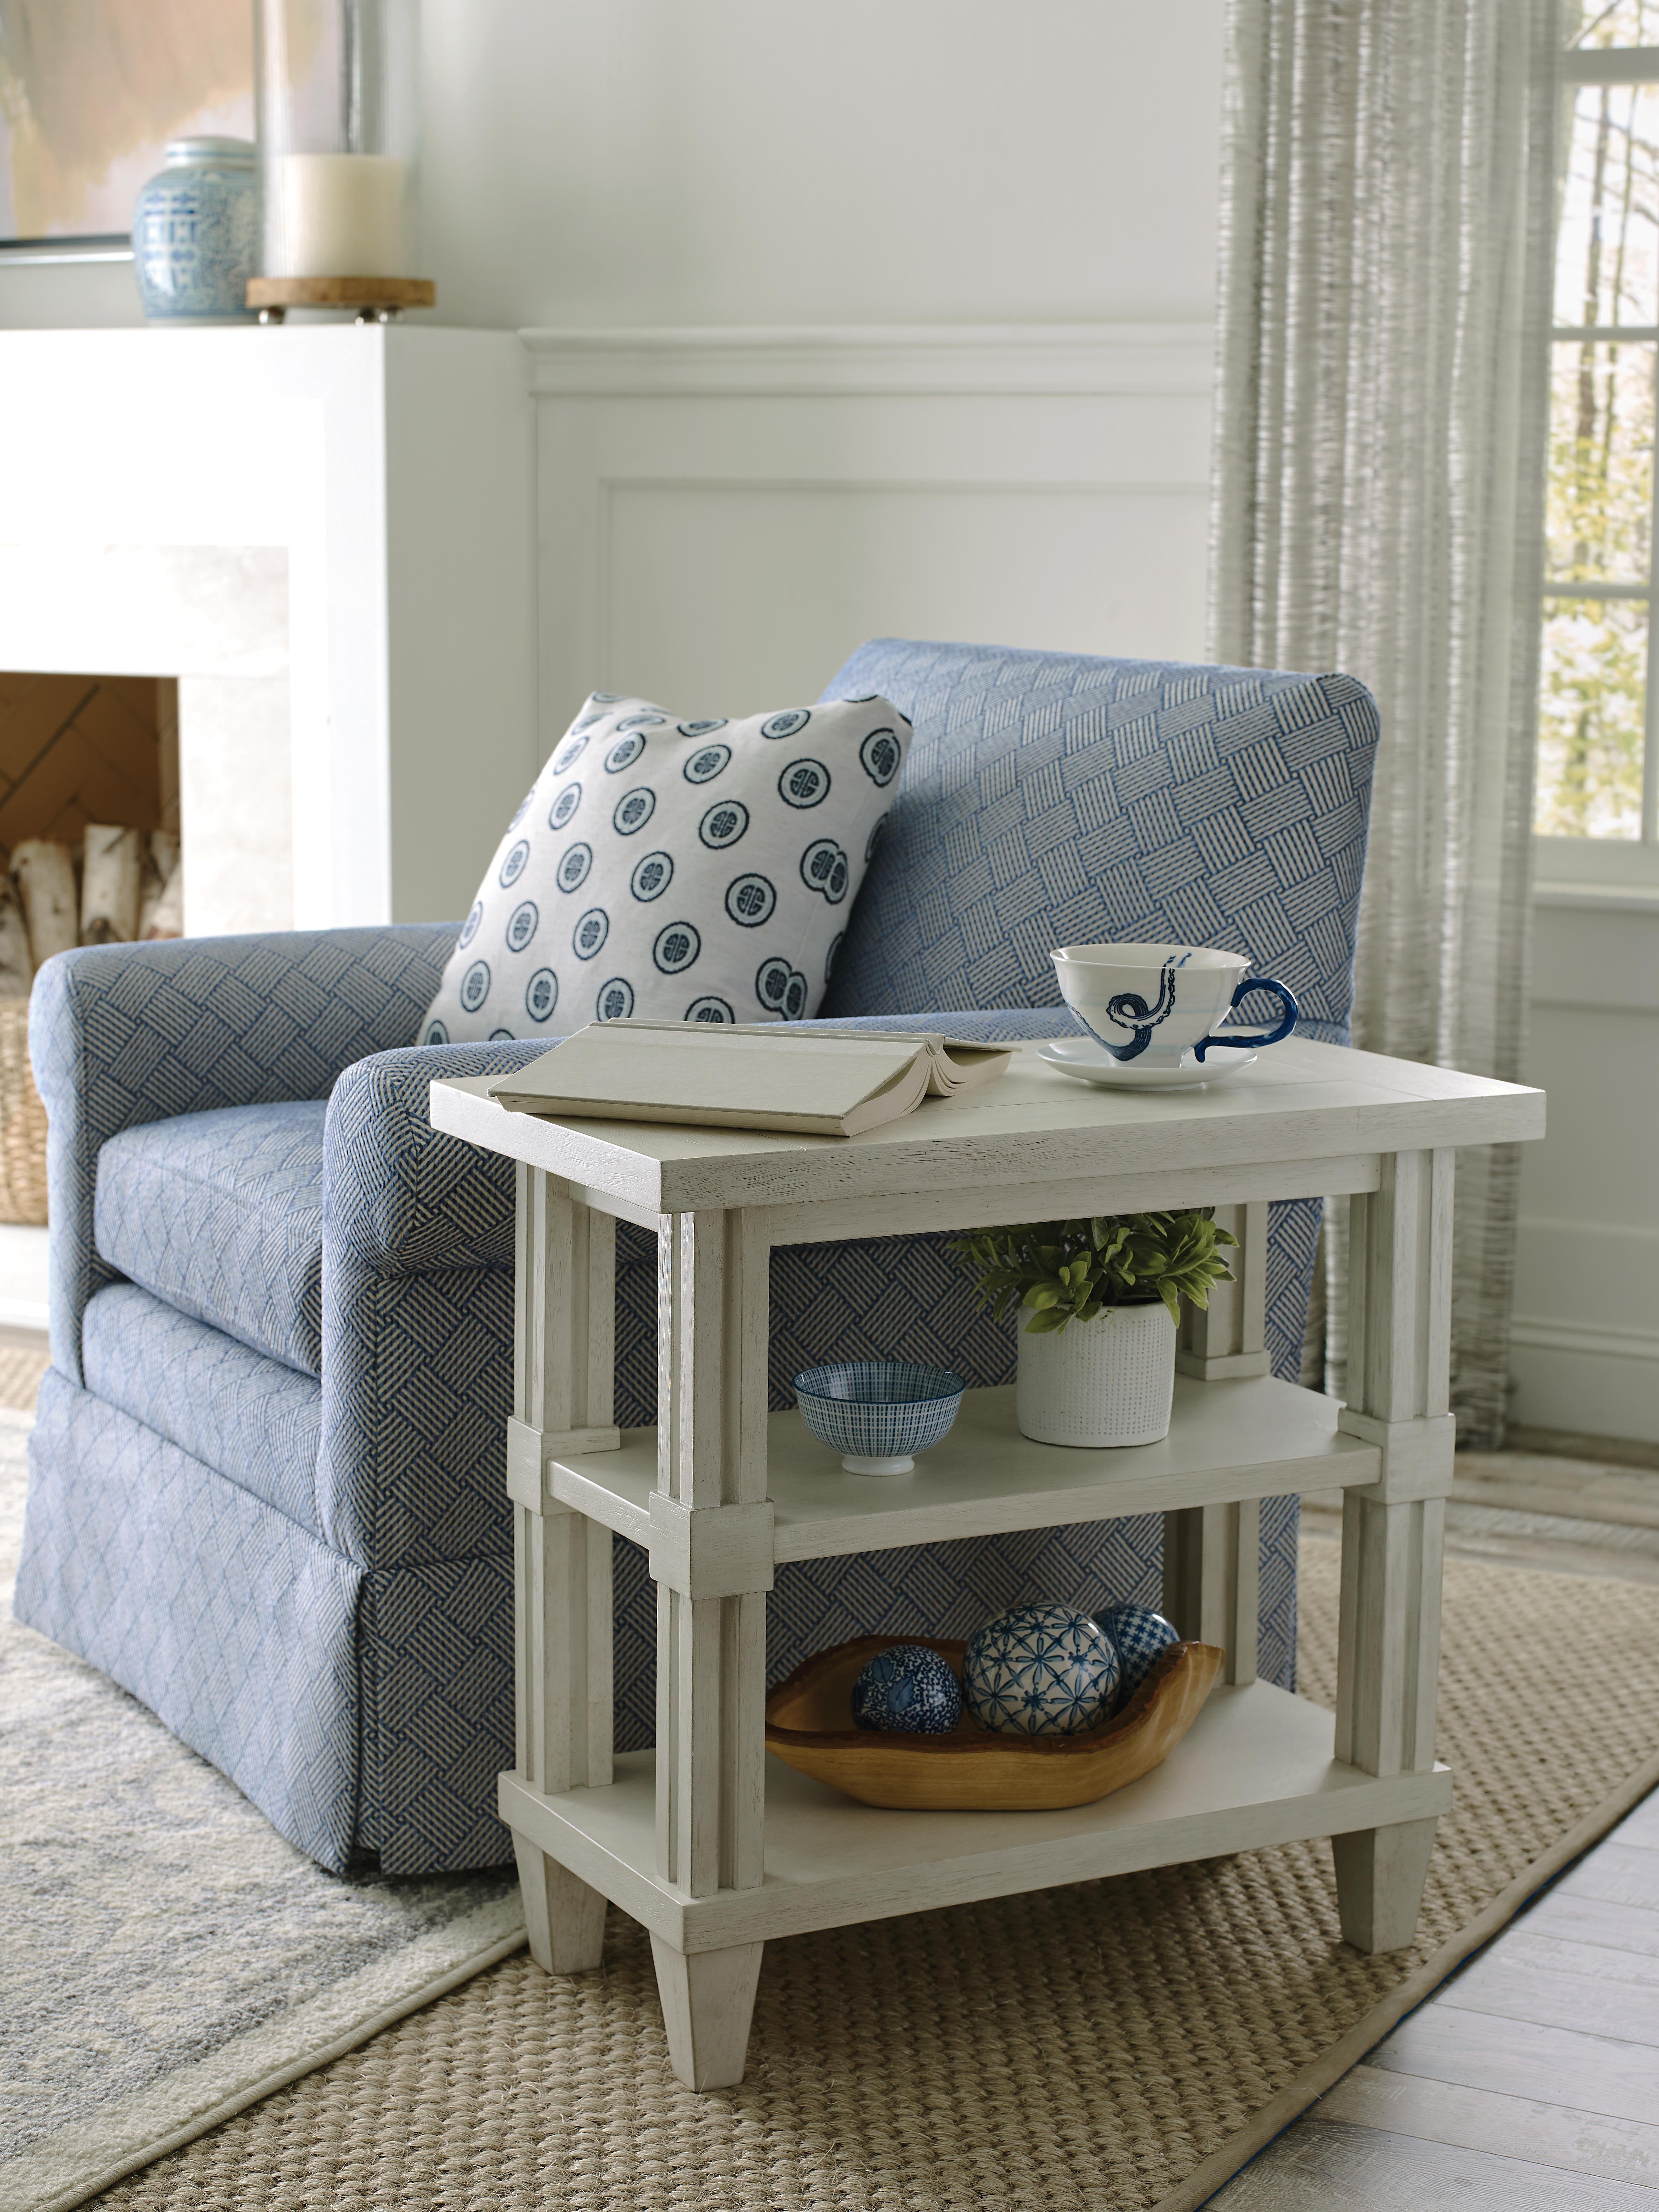 Chairsides Wayland Chairside Table